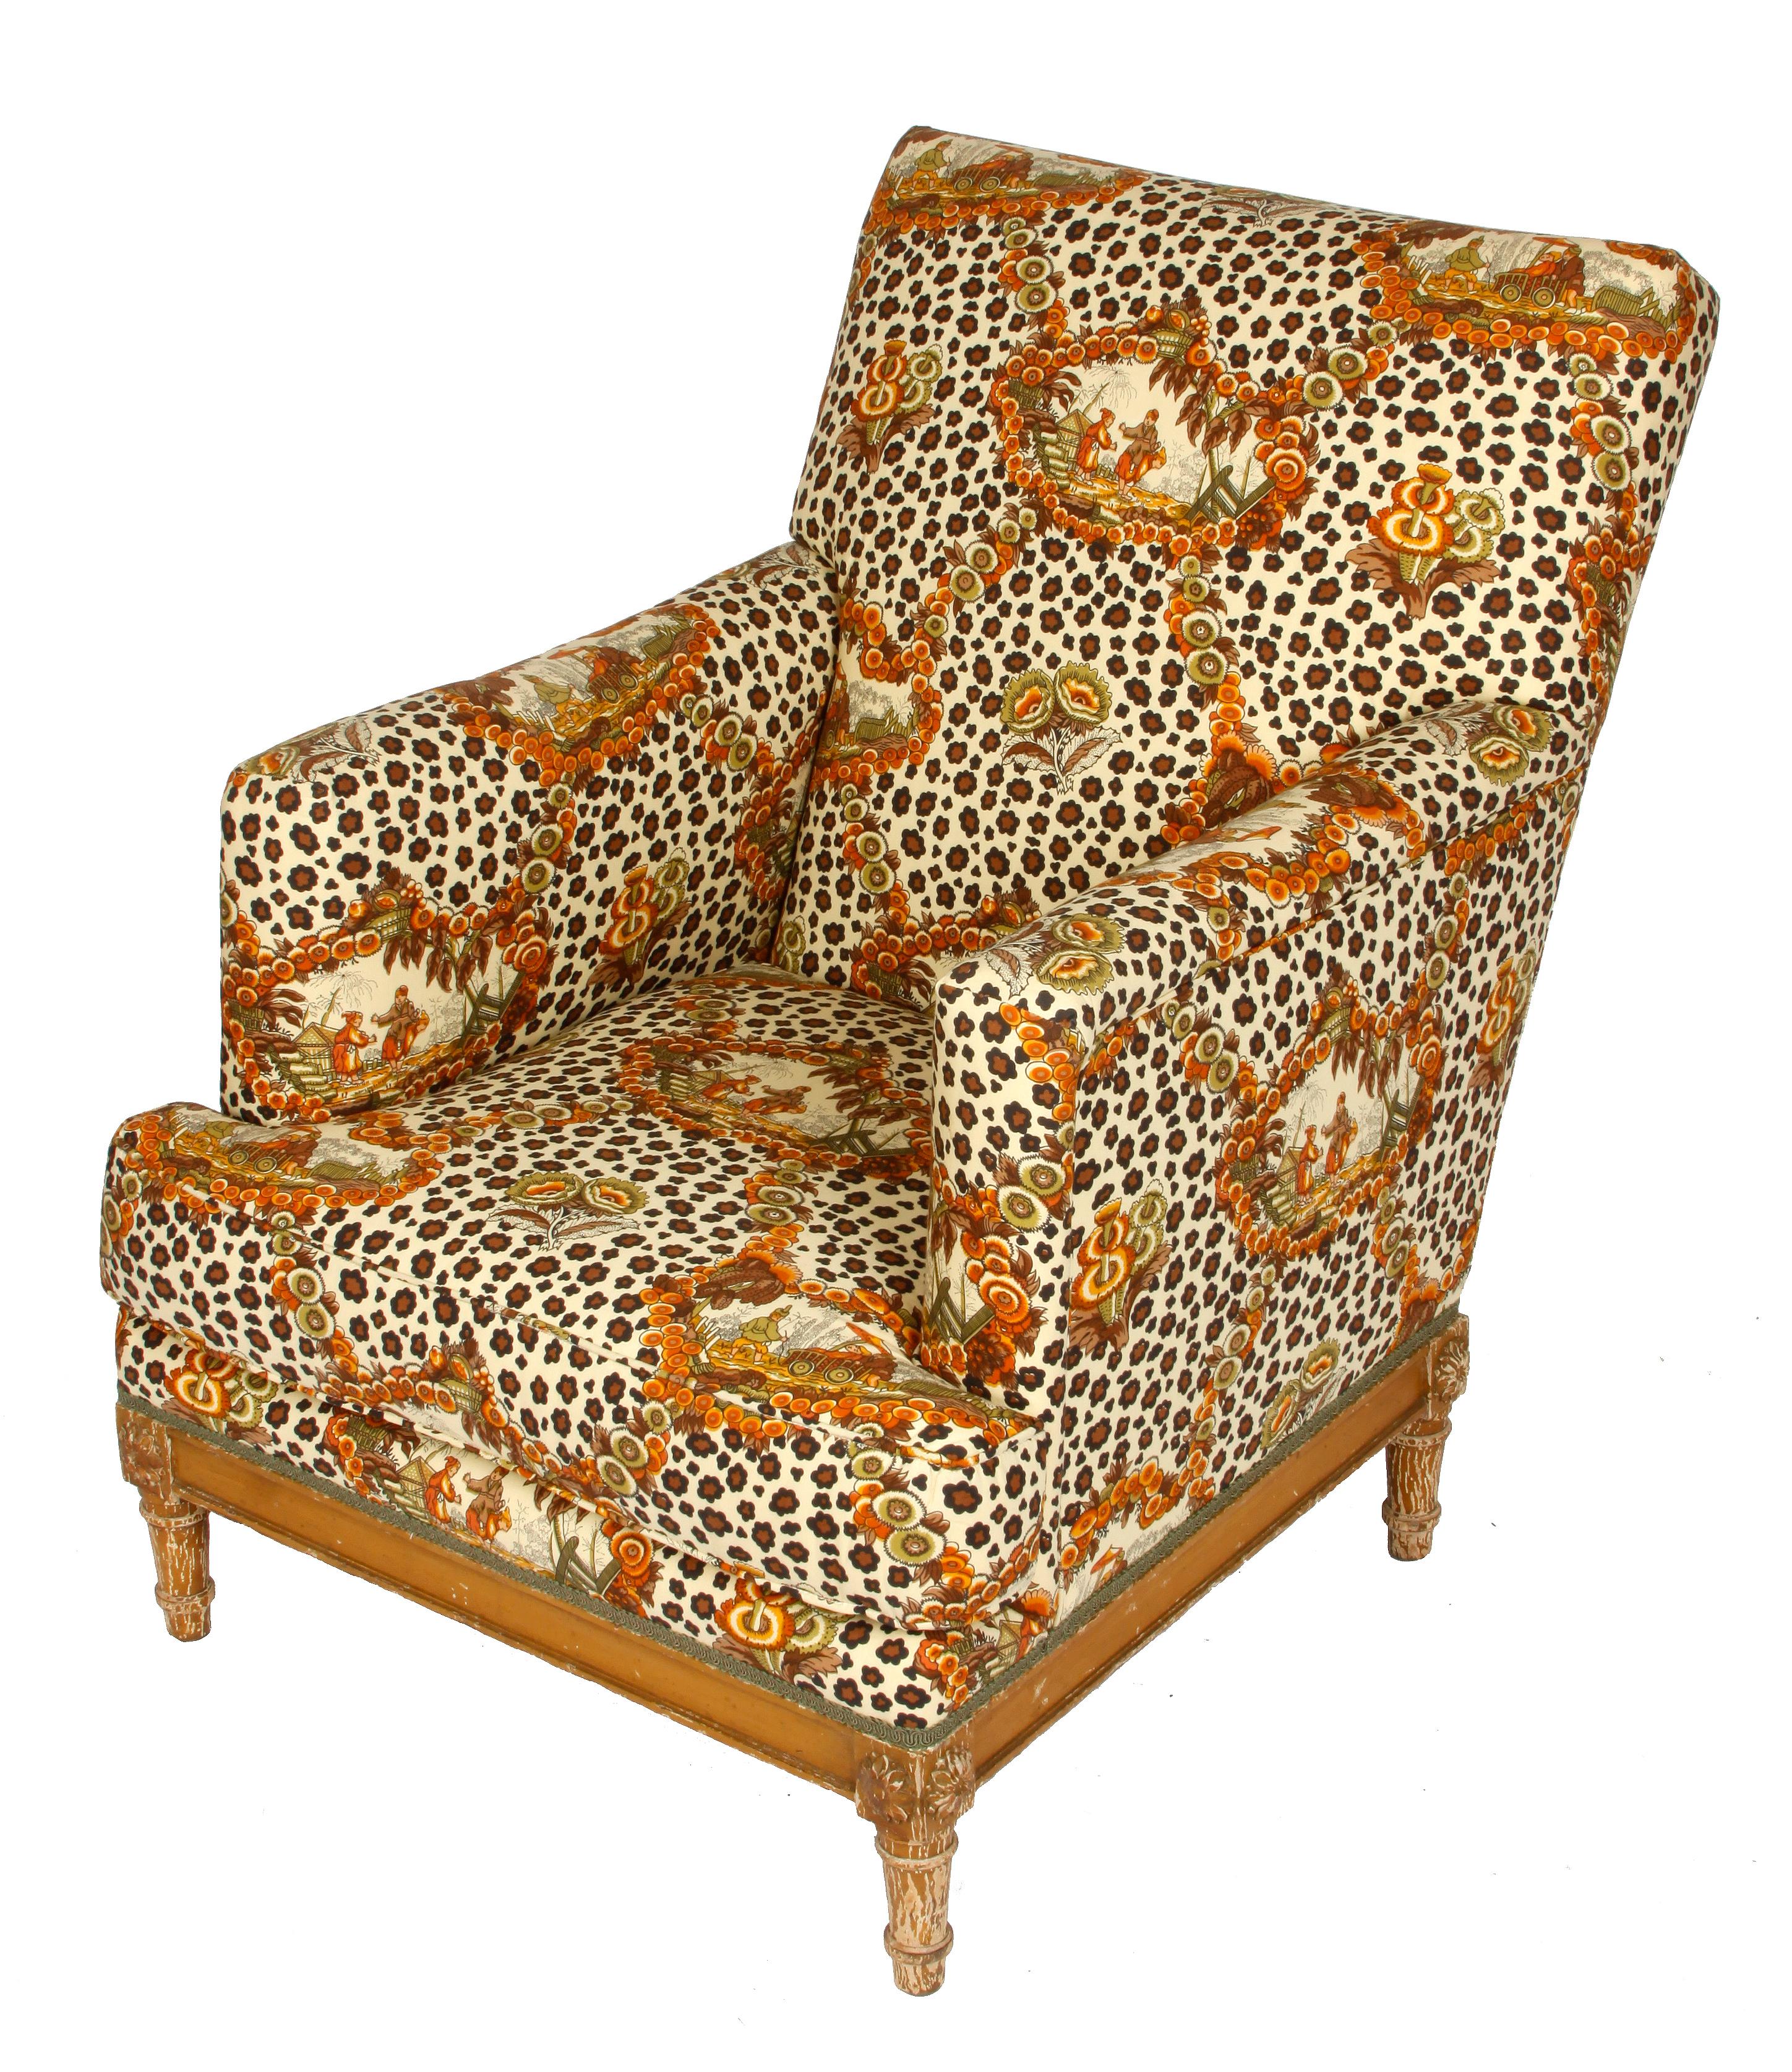 Jansen style upholstered vintage armchair in leopard design fabric with Asian scene.